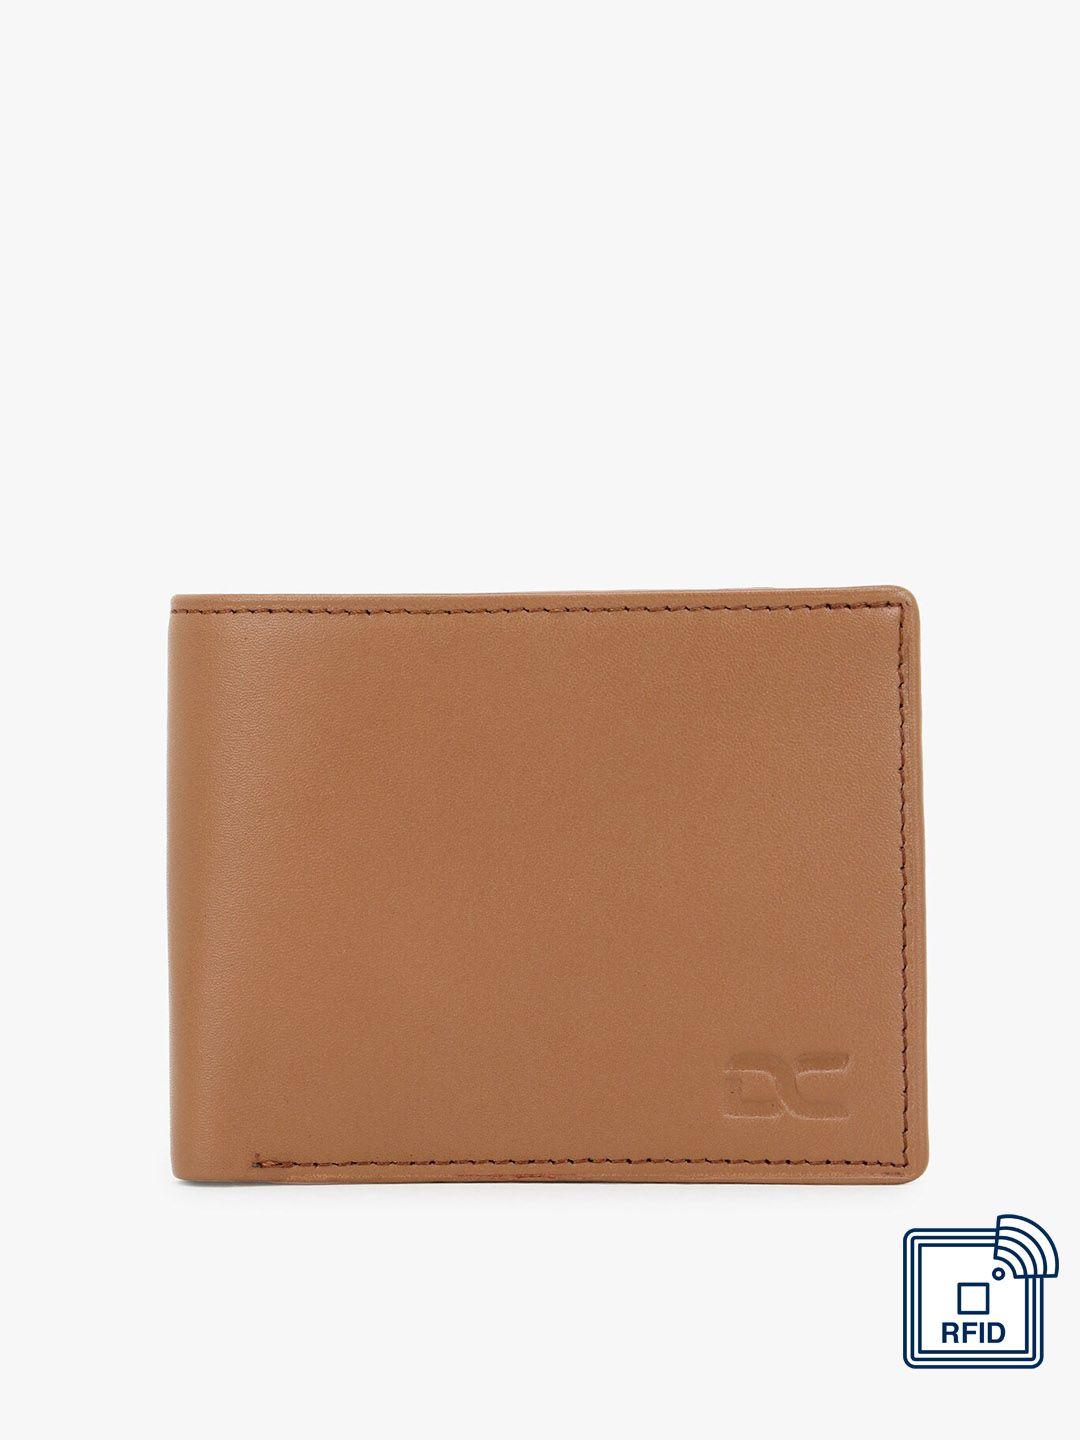 dezire crafts men tan leather two fold wallet